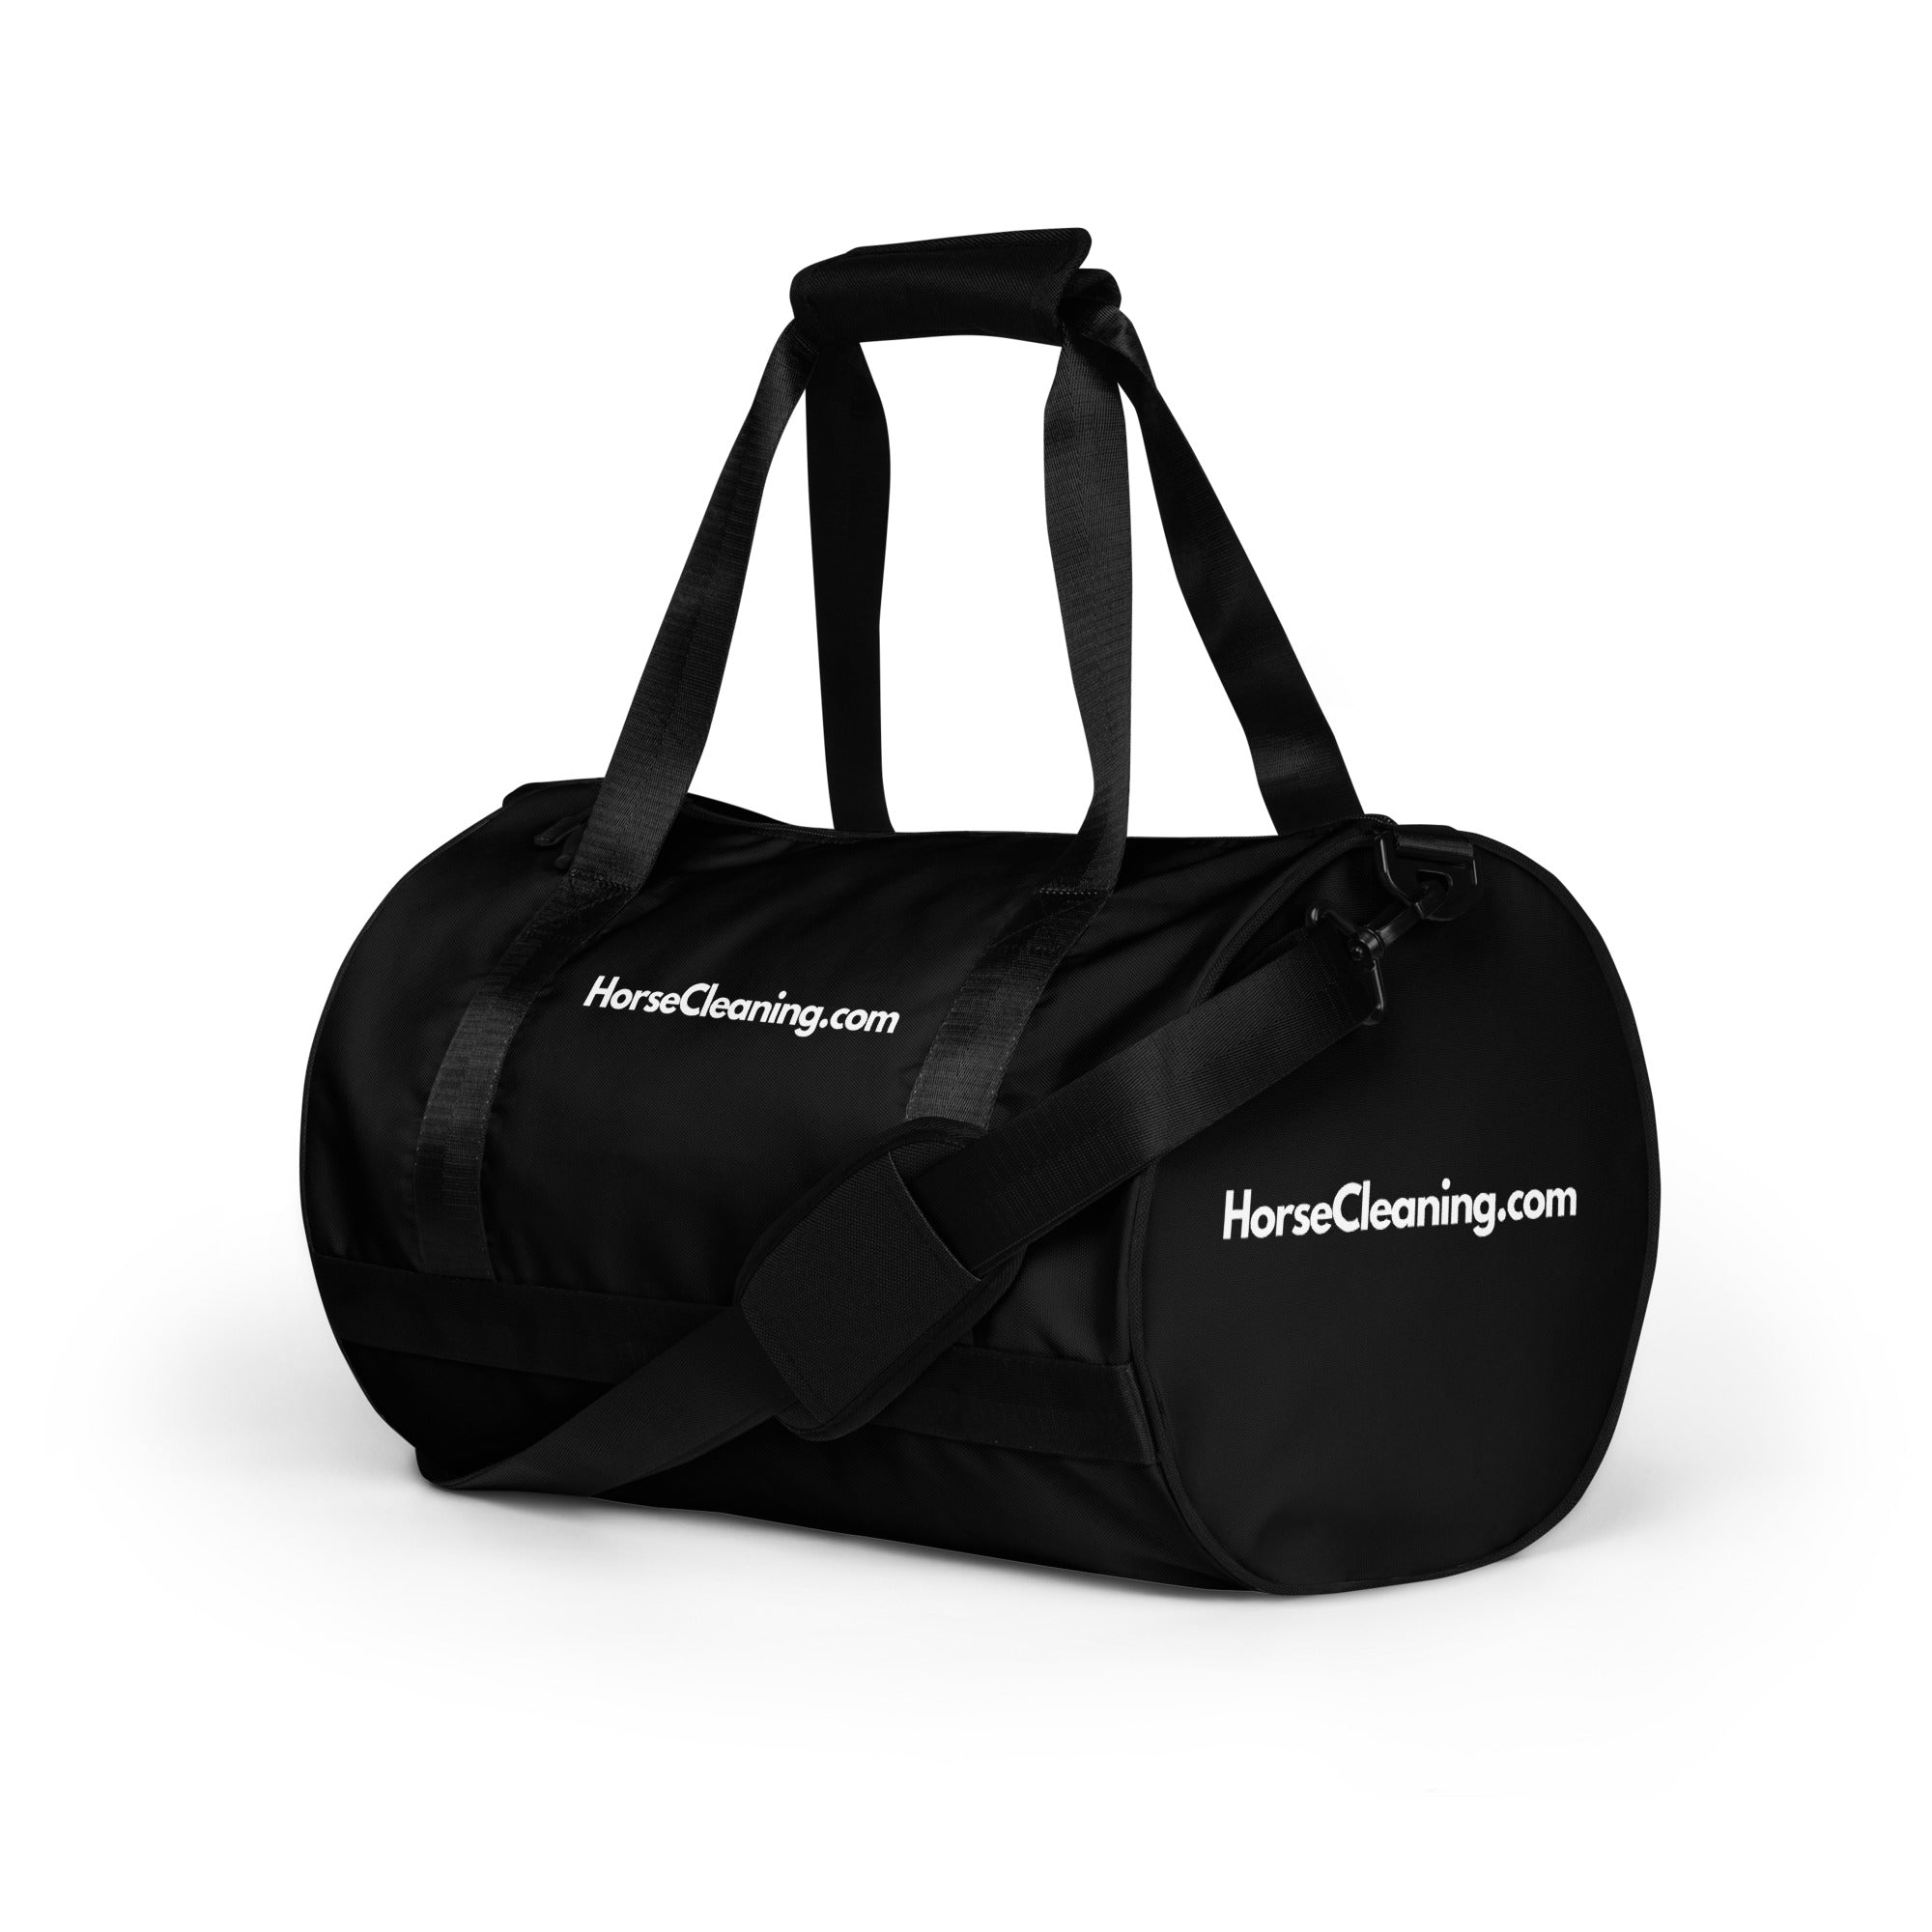 HorseCleaning.com Print Gym Bag - Horse Cleaning Masters Of Shampoos ™